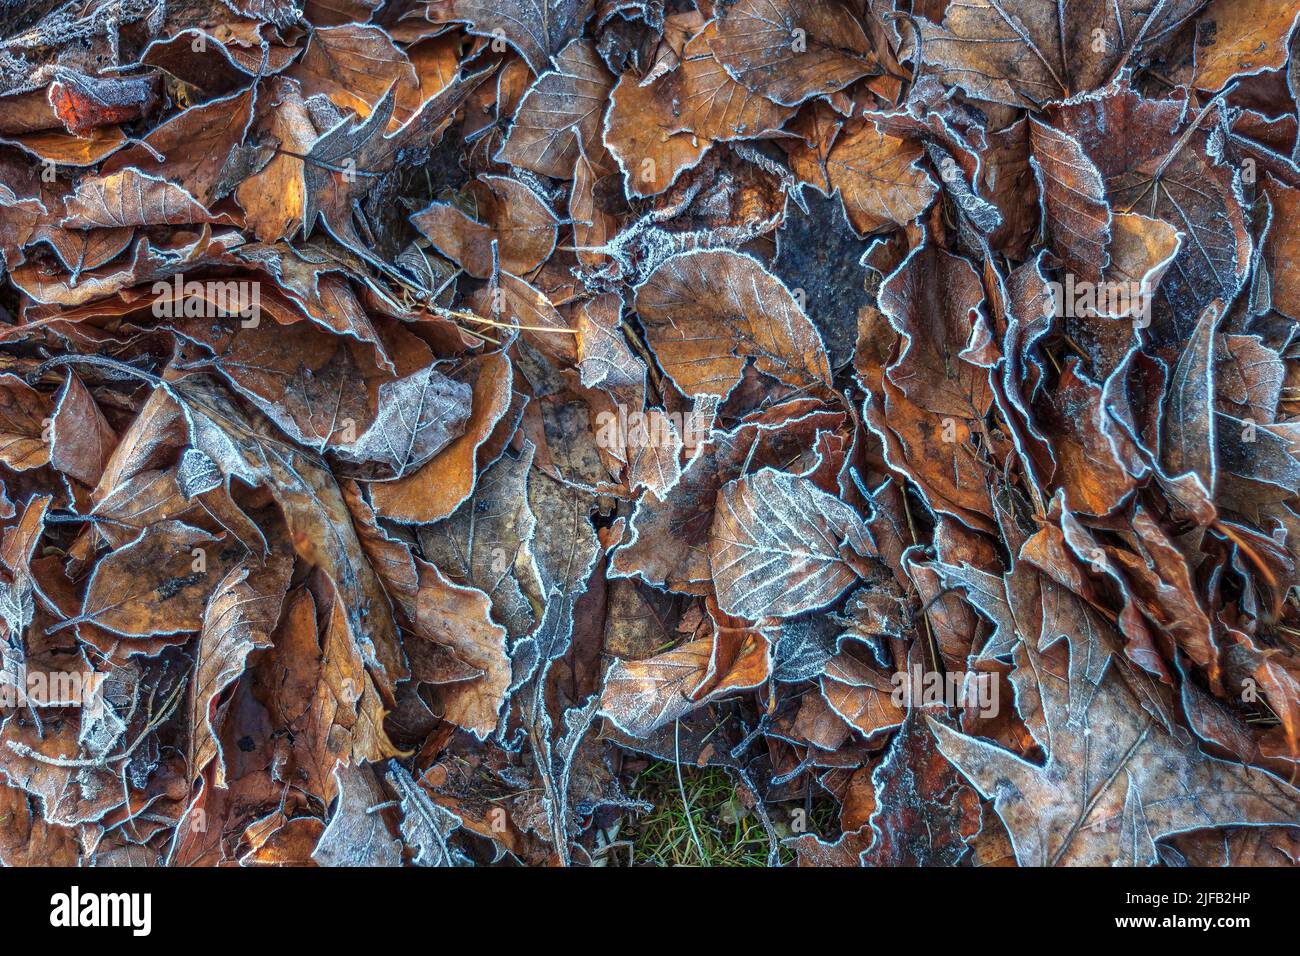 Pile of dead frosty leaves lying on the forest floor in Winter Stock Photo